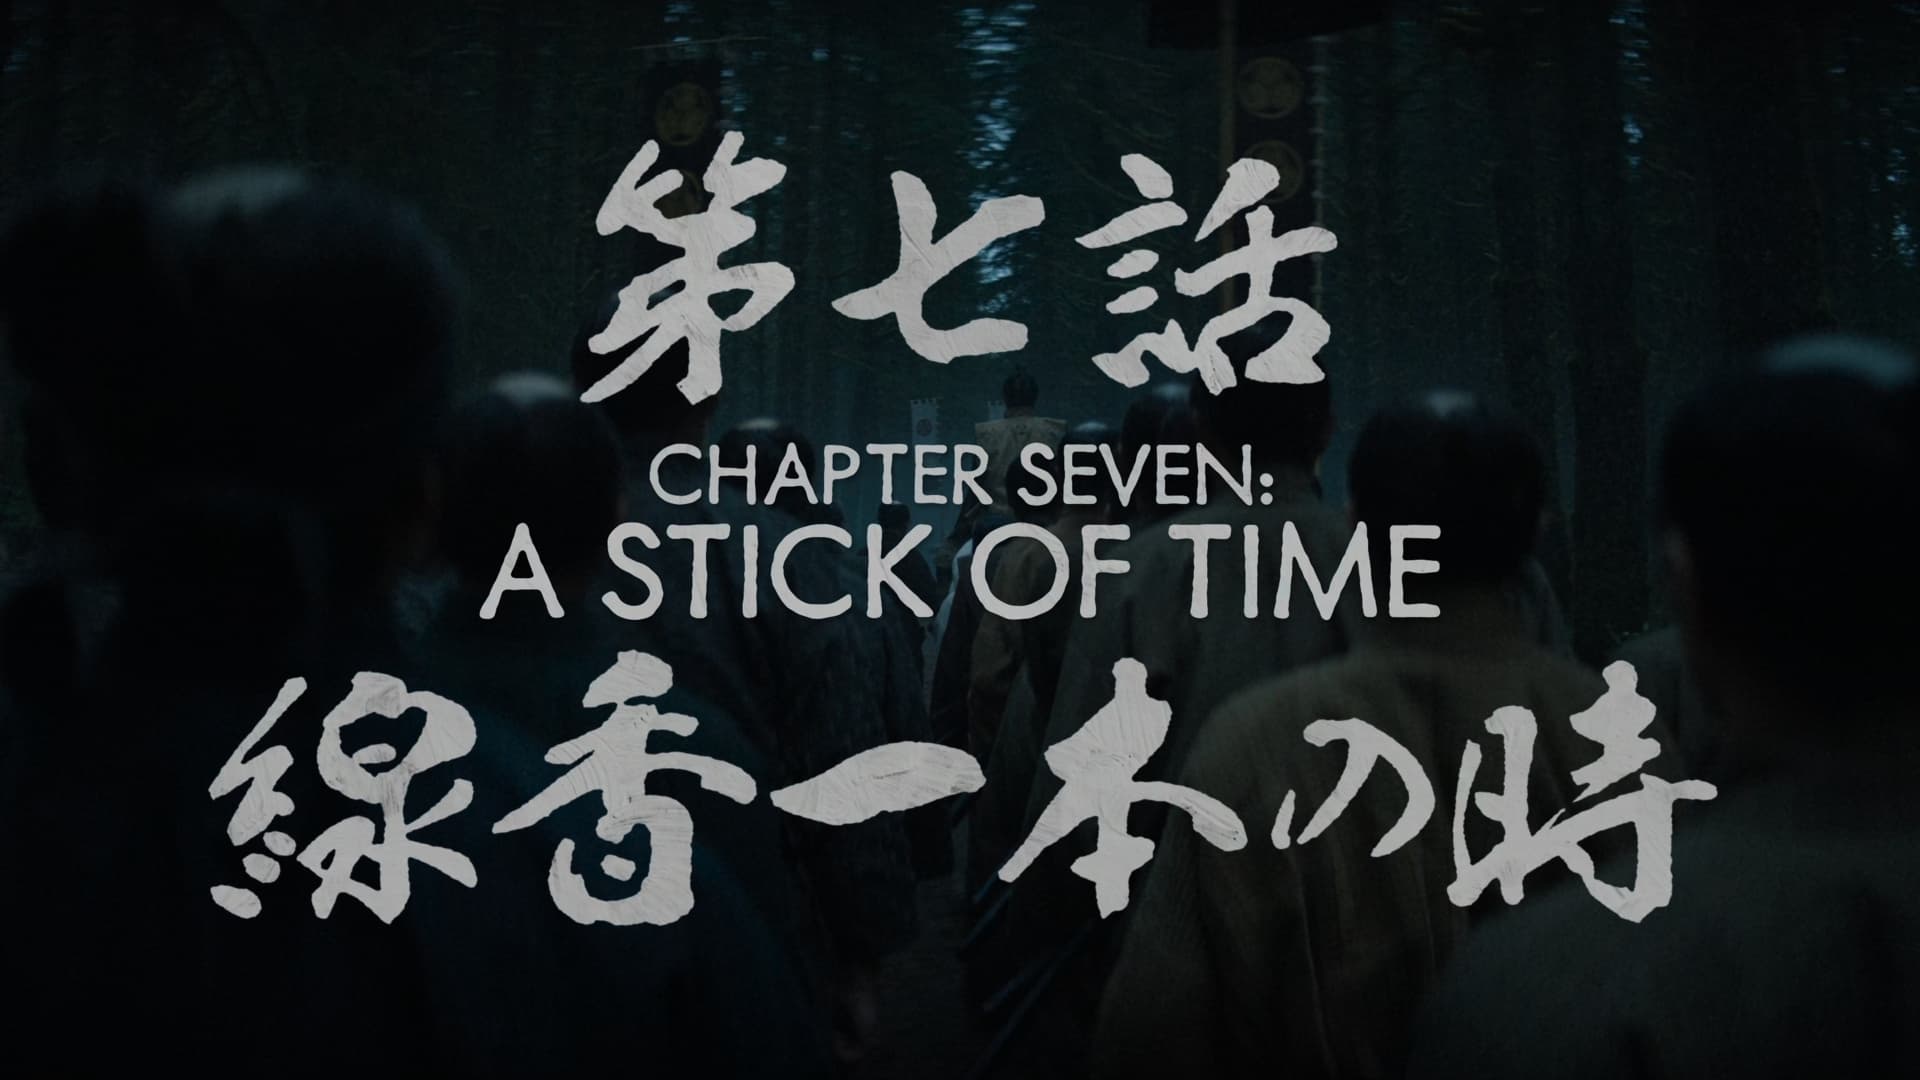 A Stick of Time